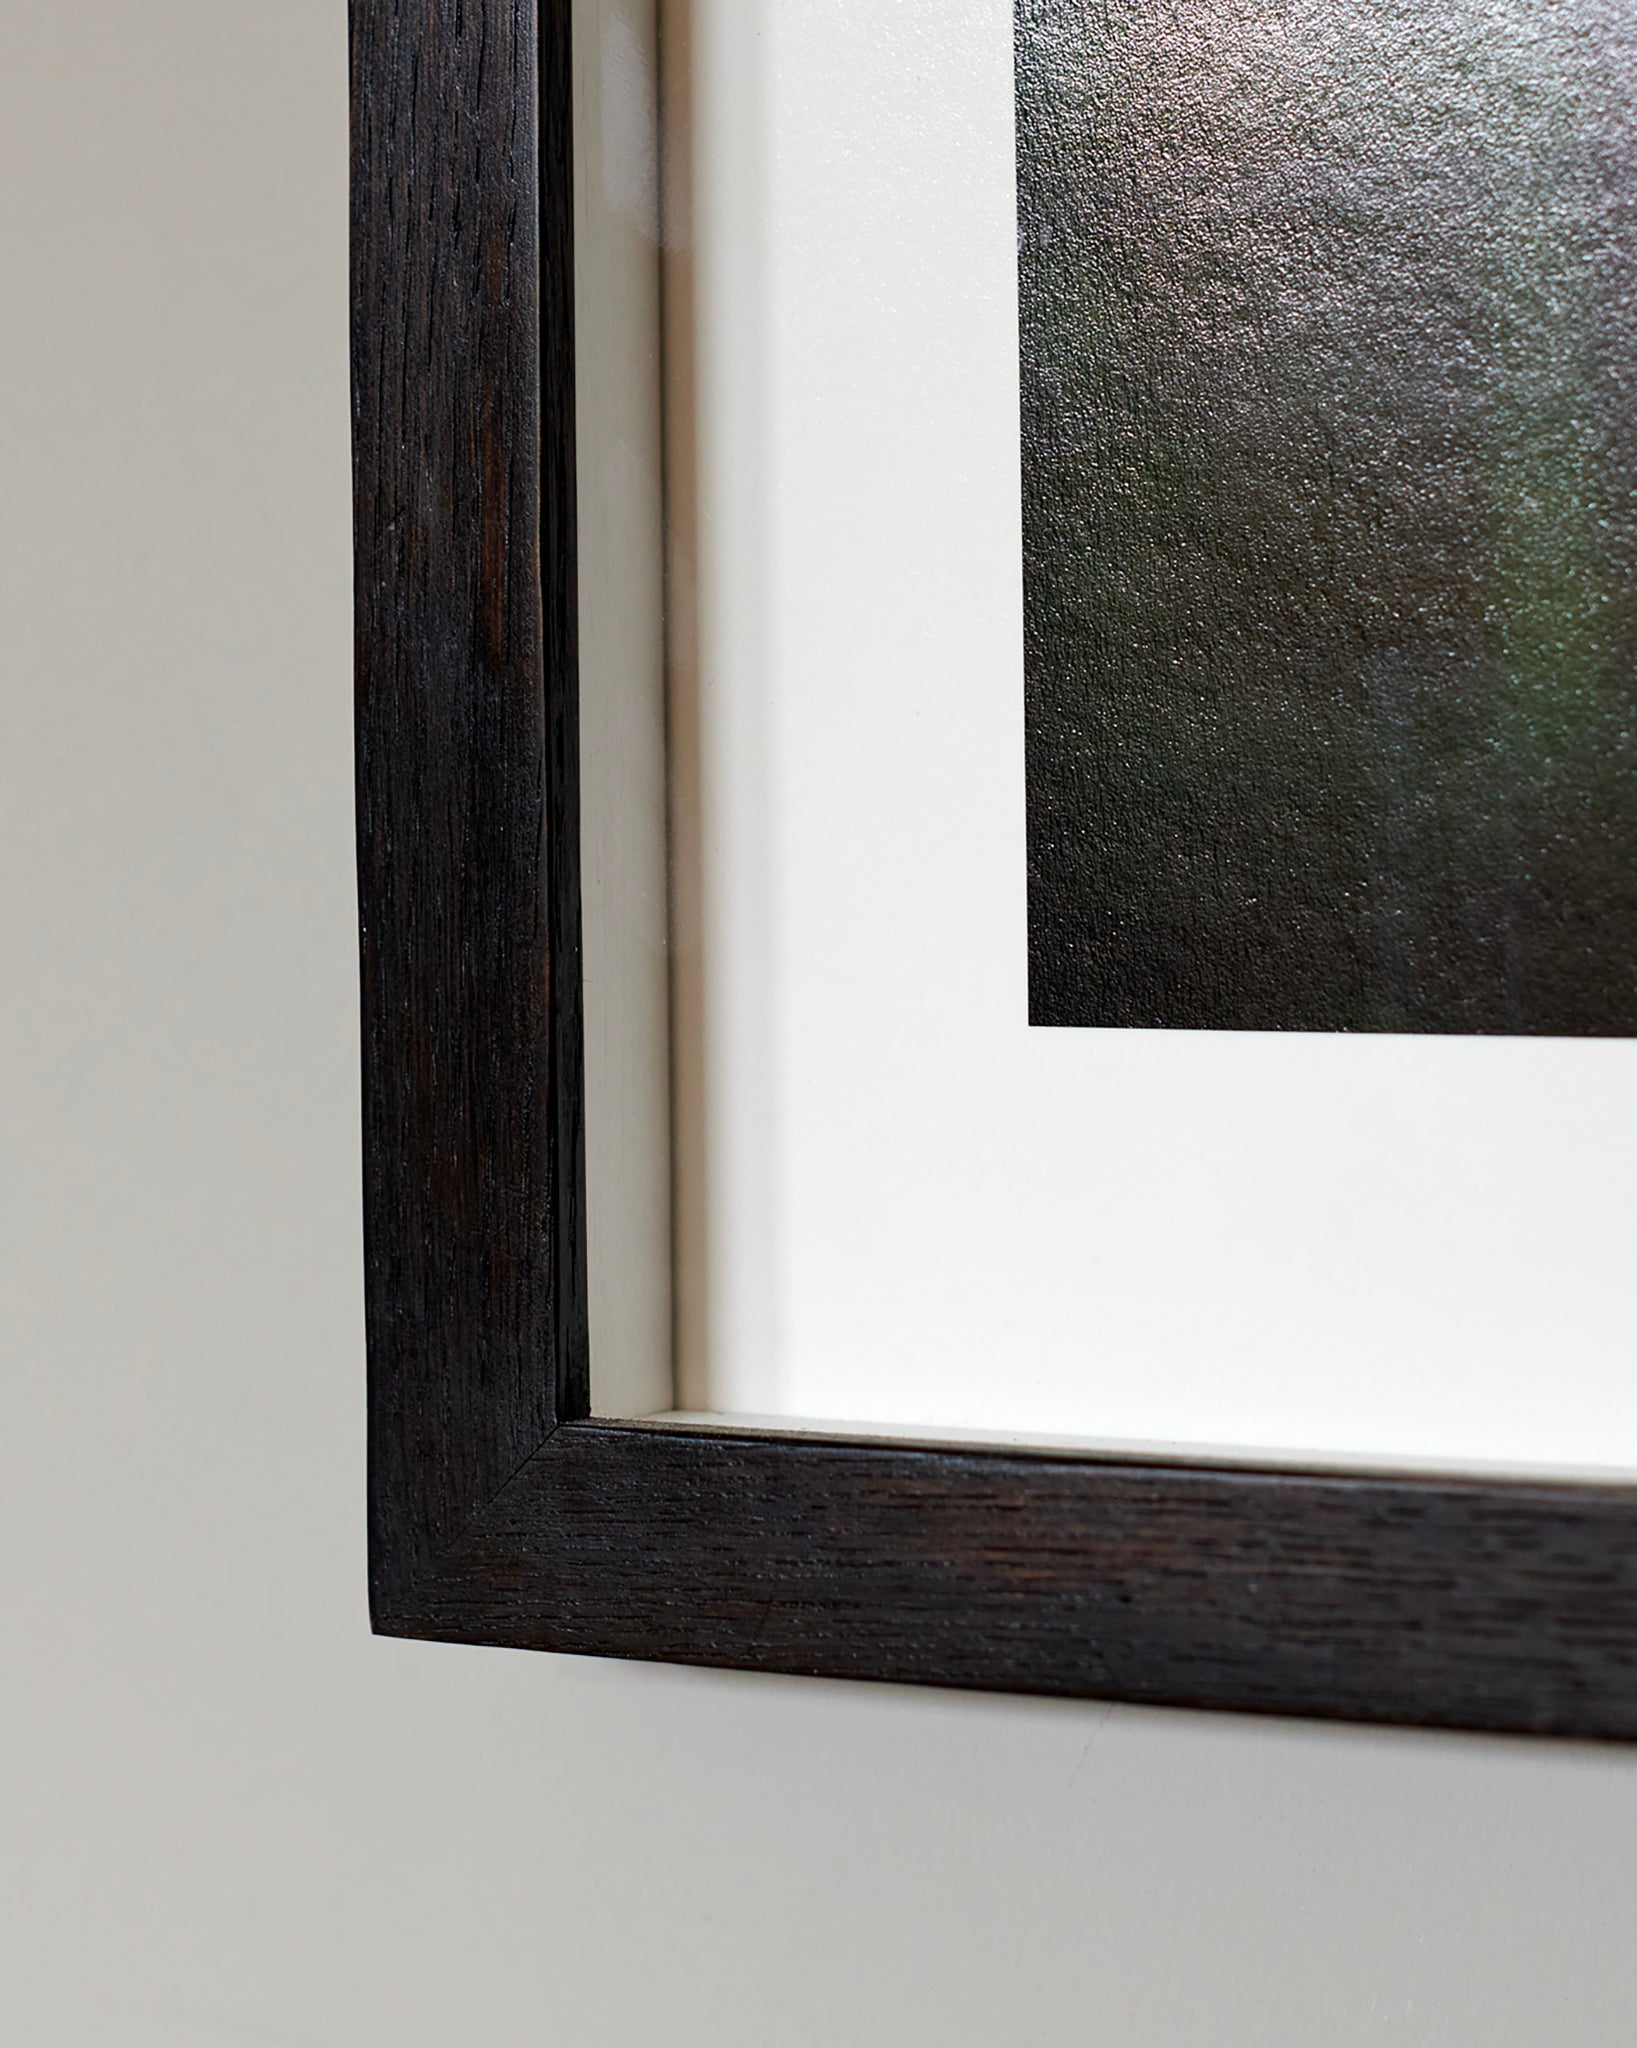 Corner detail of Bespoke Gallery Quality Black Wood Box Spacer Frame with Spacer Visible.